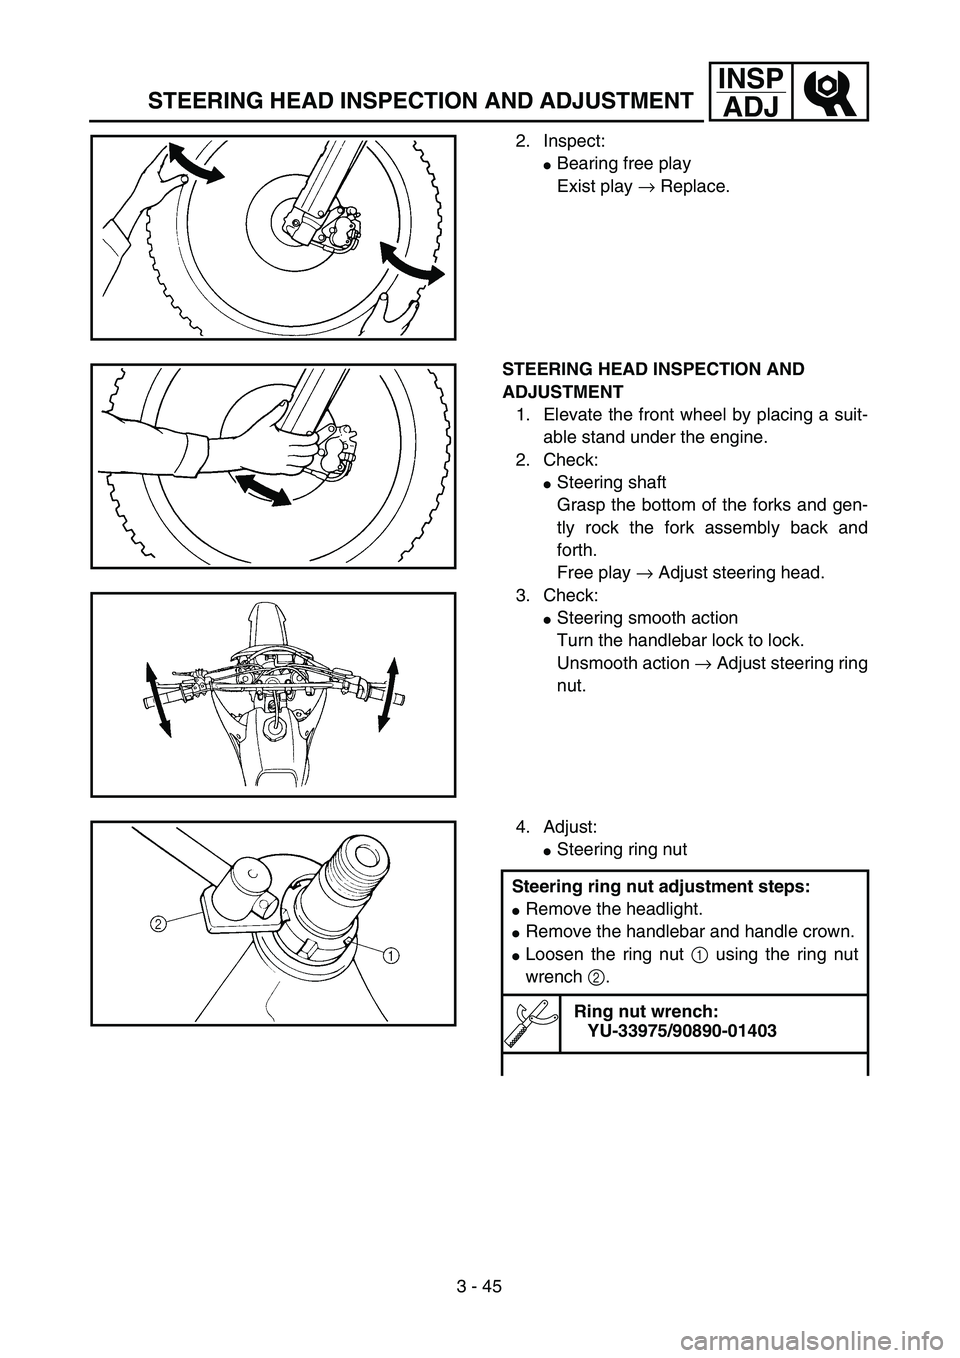 YAMAHA WR 400F 2002  Manuale de Empleo (in Spanish) 3 - 45
INSP
ADJ
STEERING HEAD INSPECTION AND ADJUSTMENT
2. Inspect:
Bearing free play
Exist play → Replace.
STEERING HEAD INSPECTION AND 
ADJUSTMENT
1. Elevate the front wheel by placing a suit-
ab